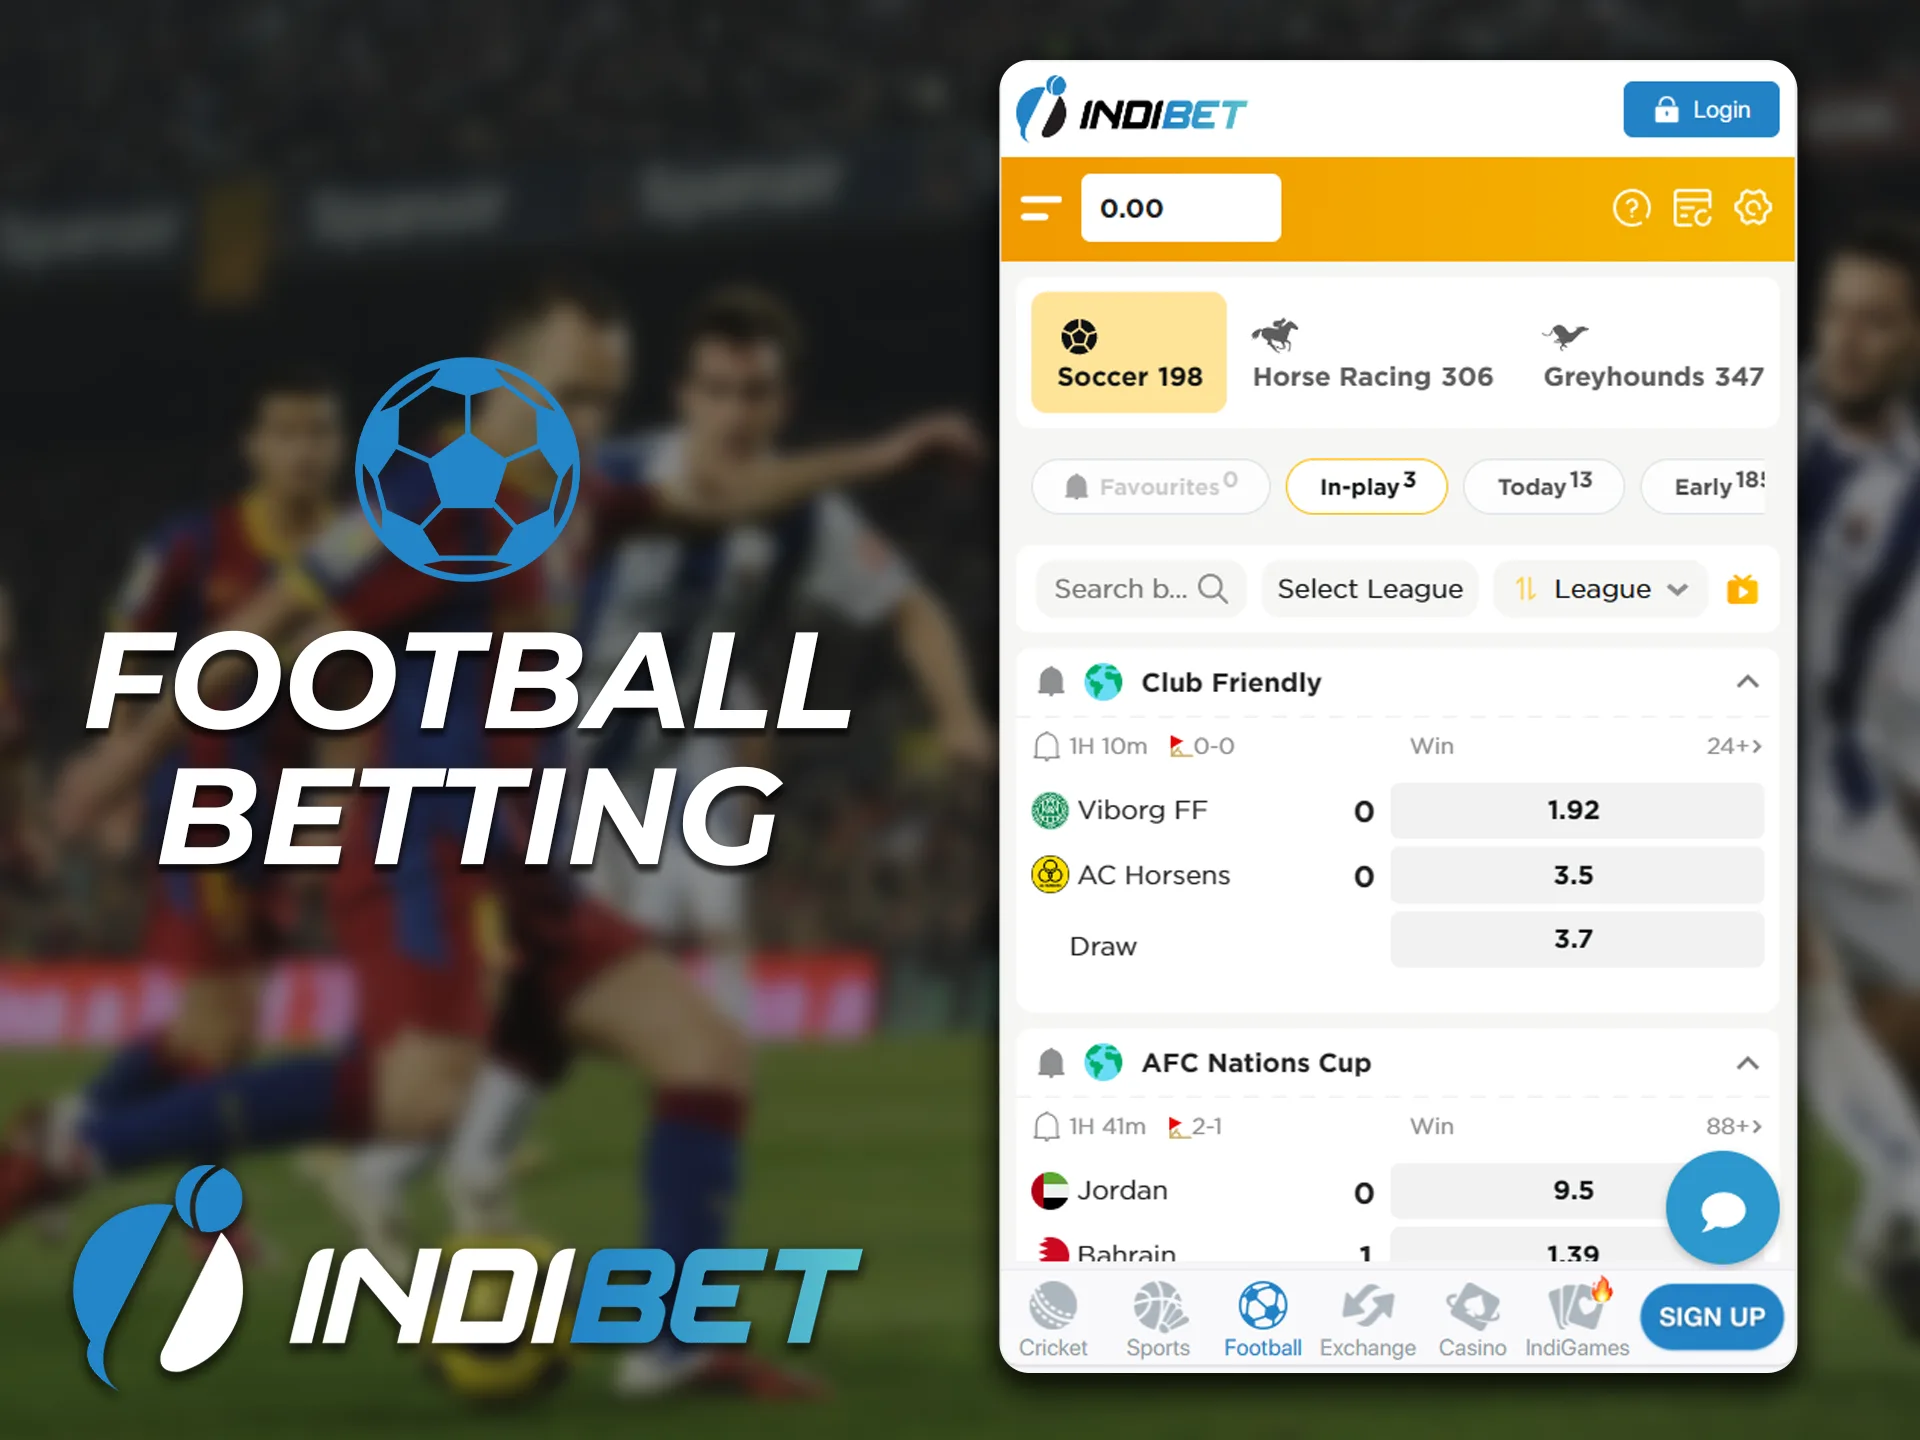 The bookmaker offers competitive odds on football betting on the Indibet app.